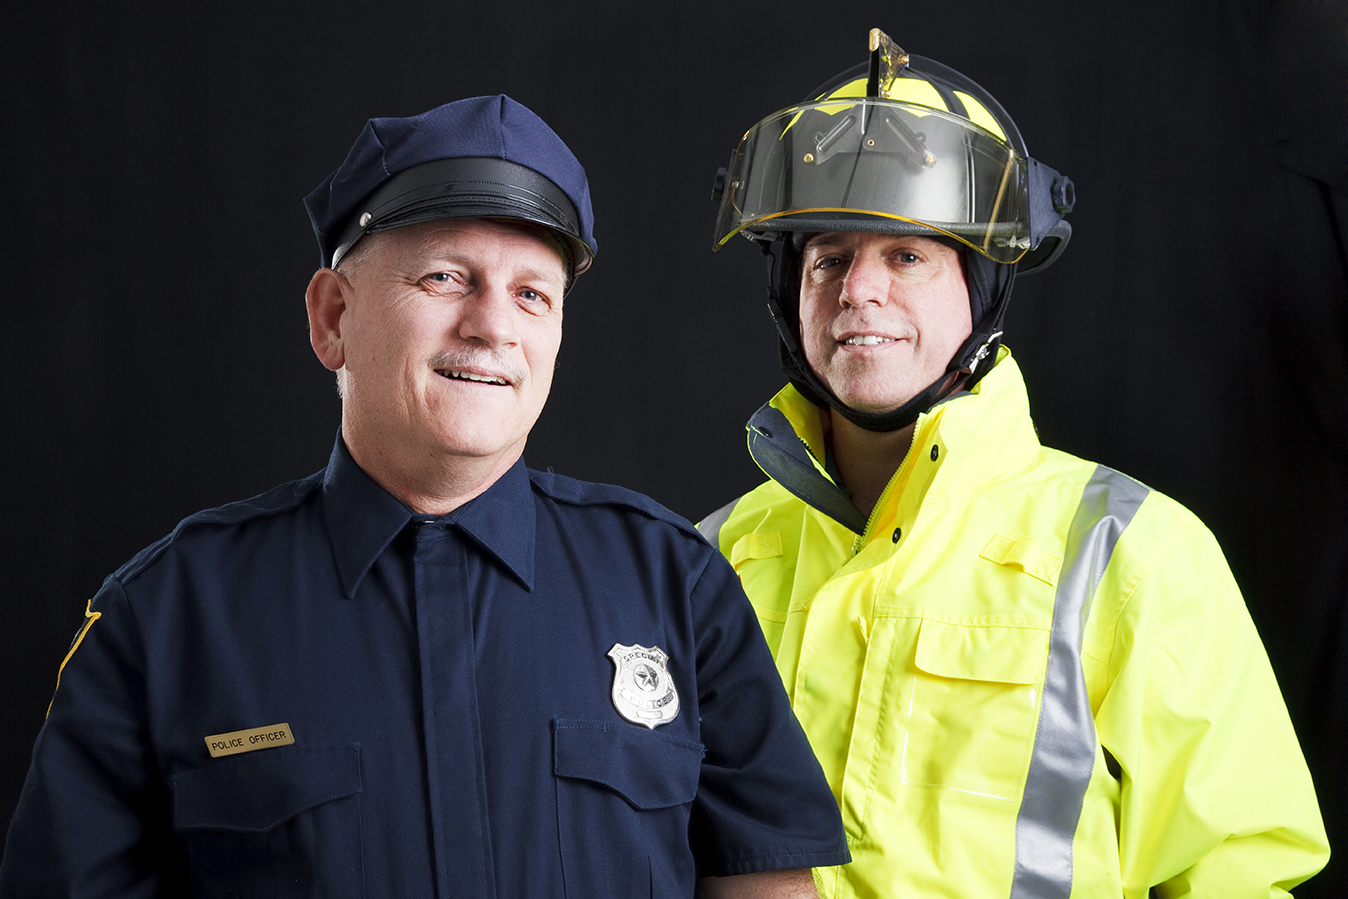 public safety officers